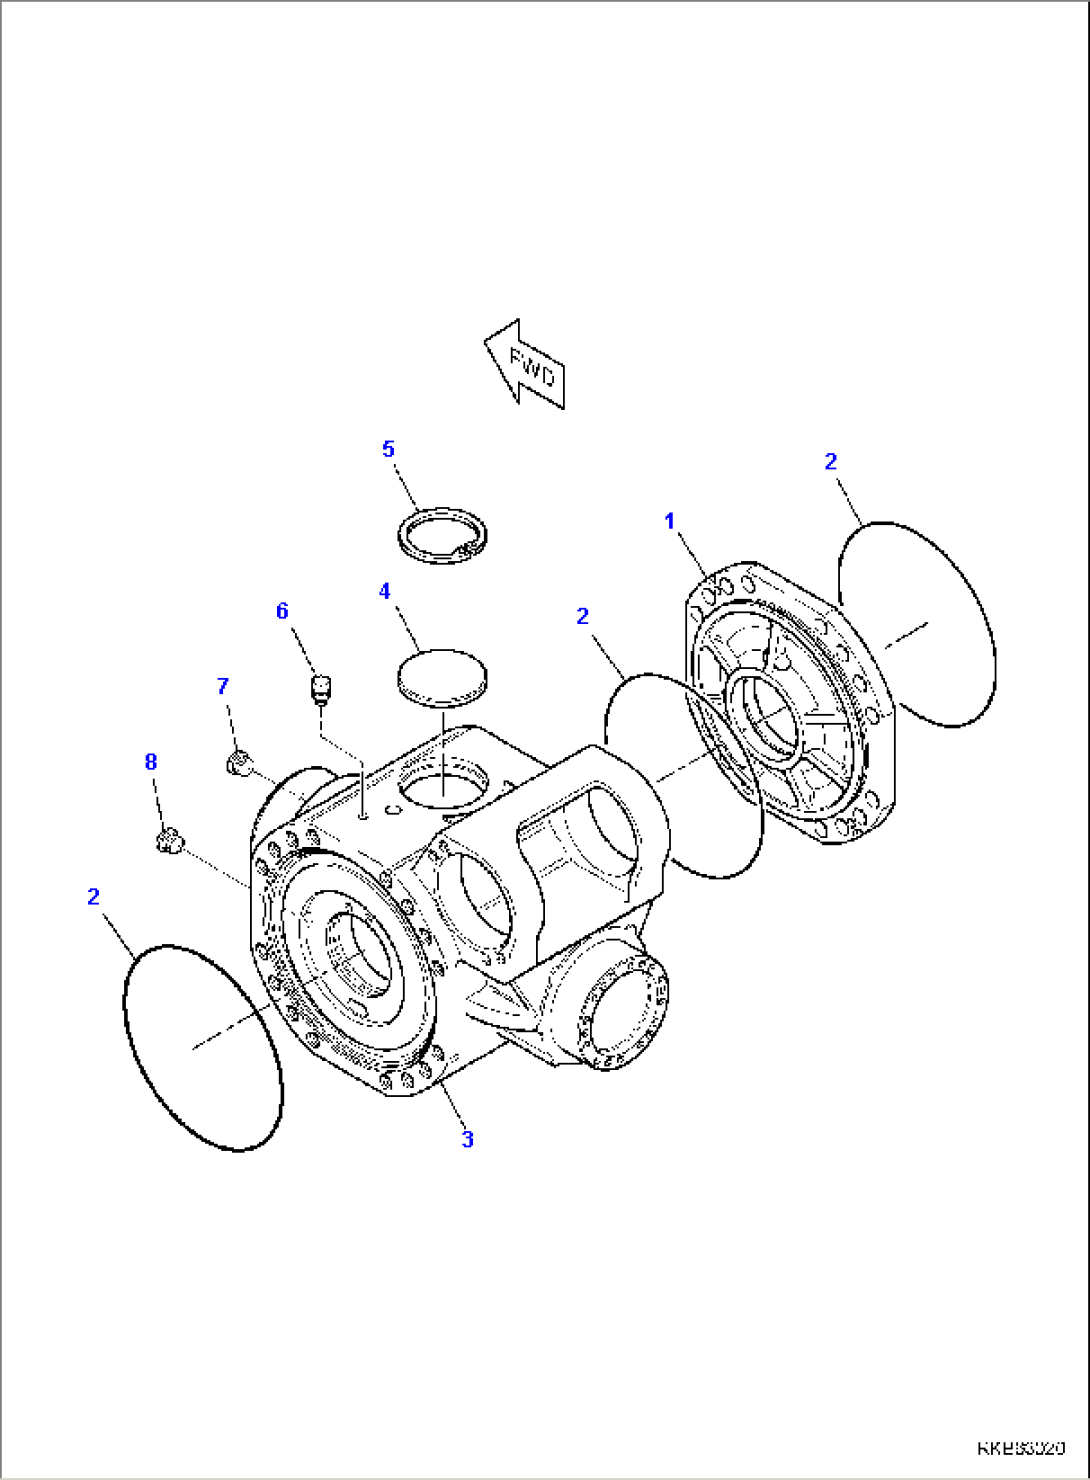 FRONT AXLE (1/7)